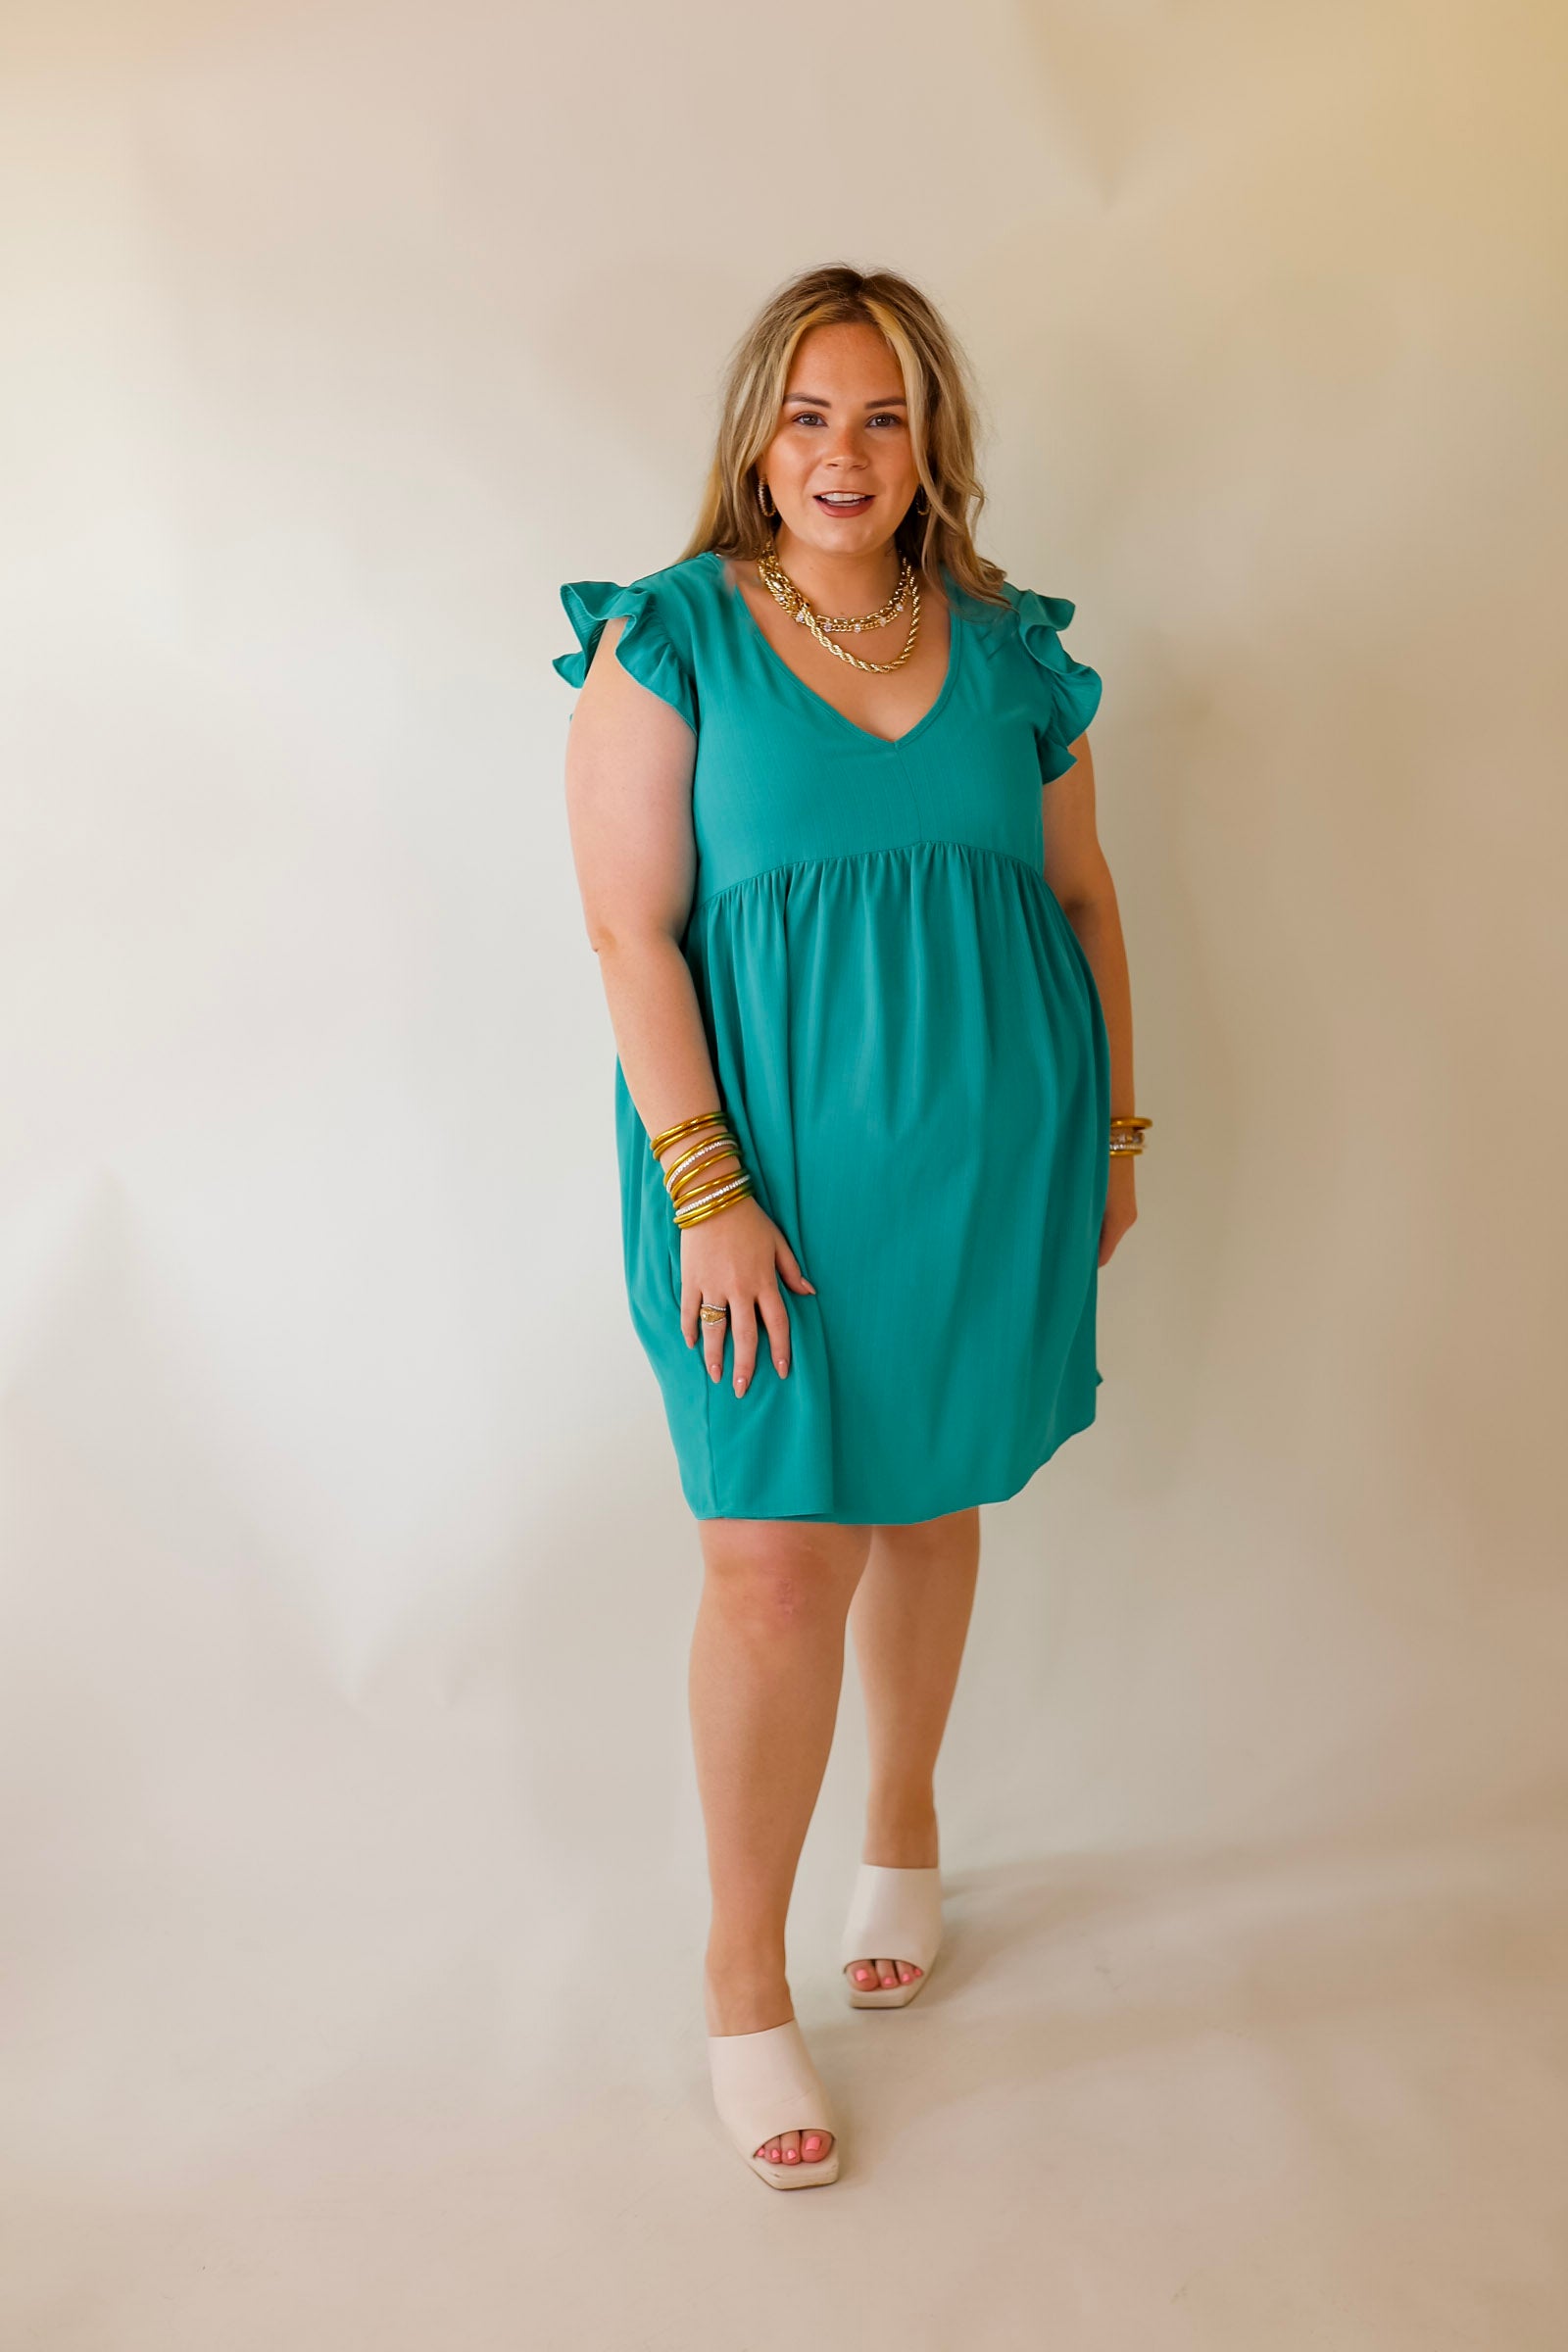 Capture Your Attention V Neck Dress with Ruffle Cap Sleeves in Turquoise